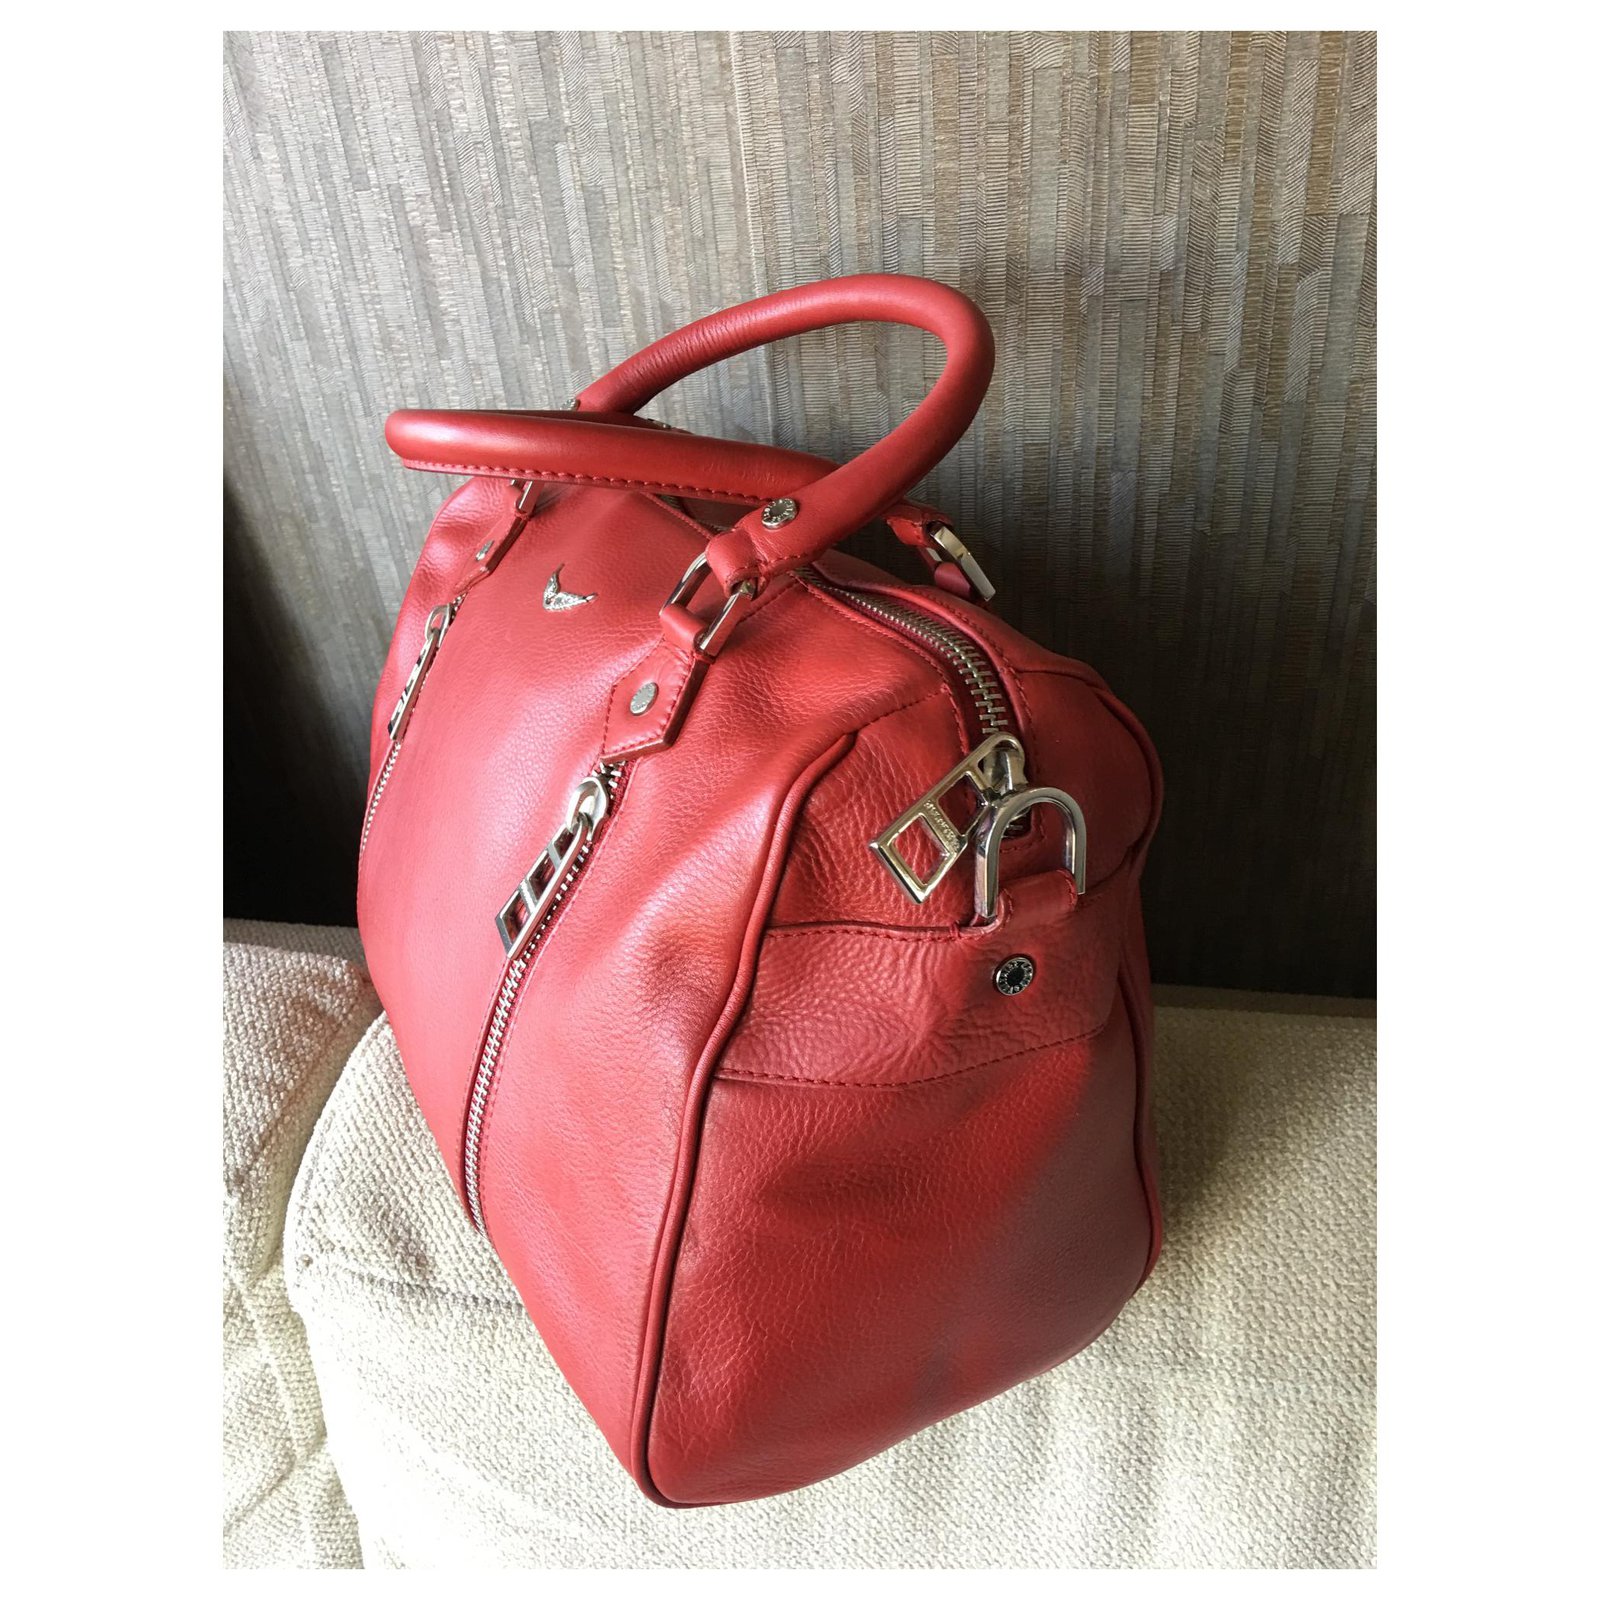 Zadig & Voltaire Red Leather Bag - Sunny city